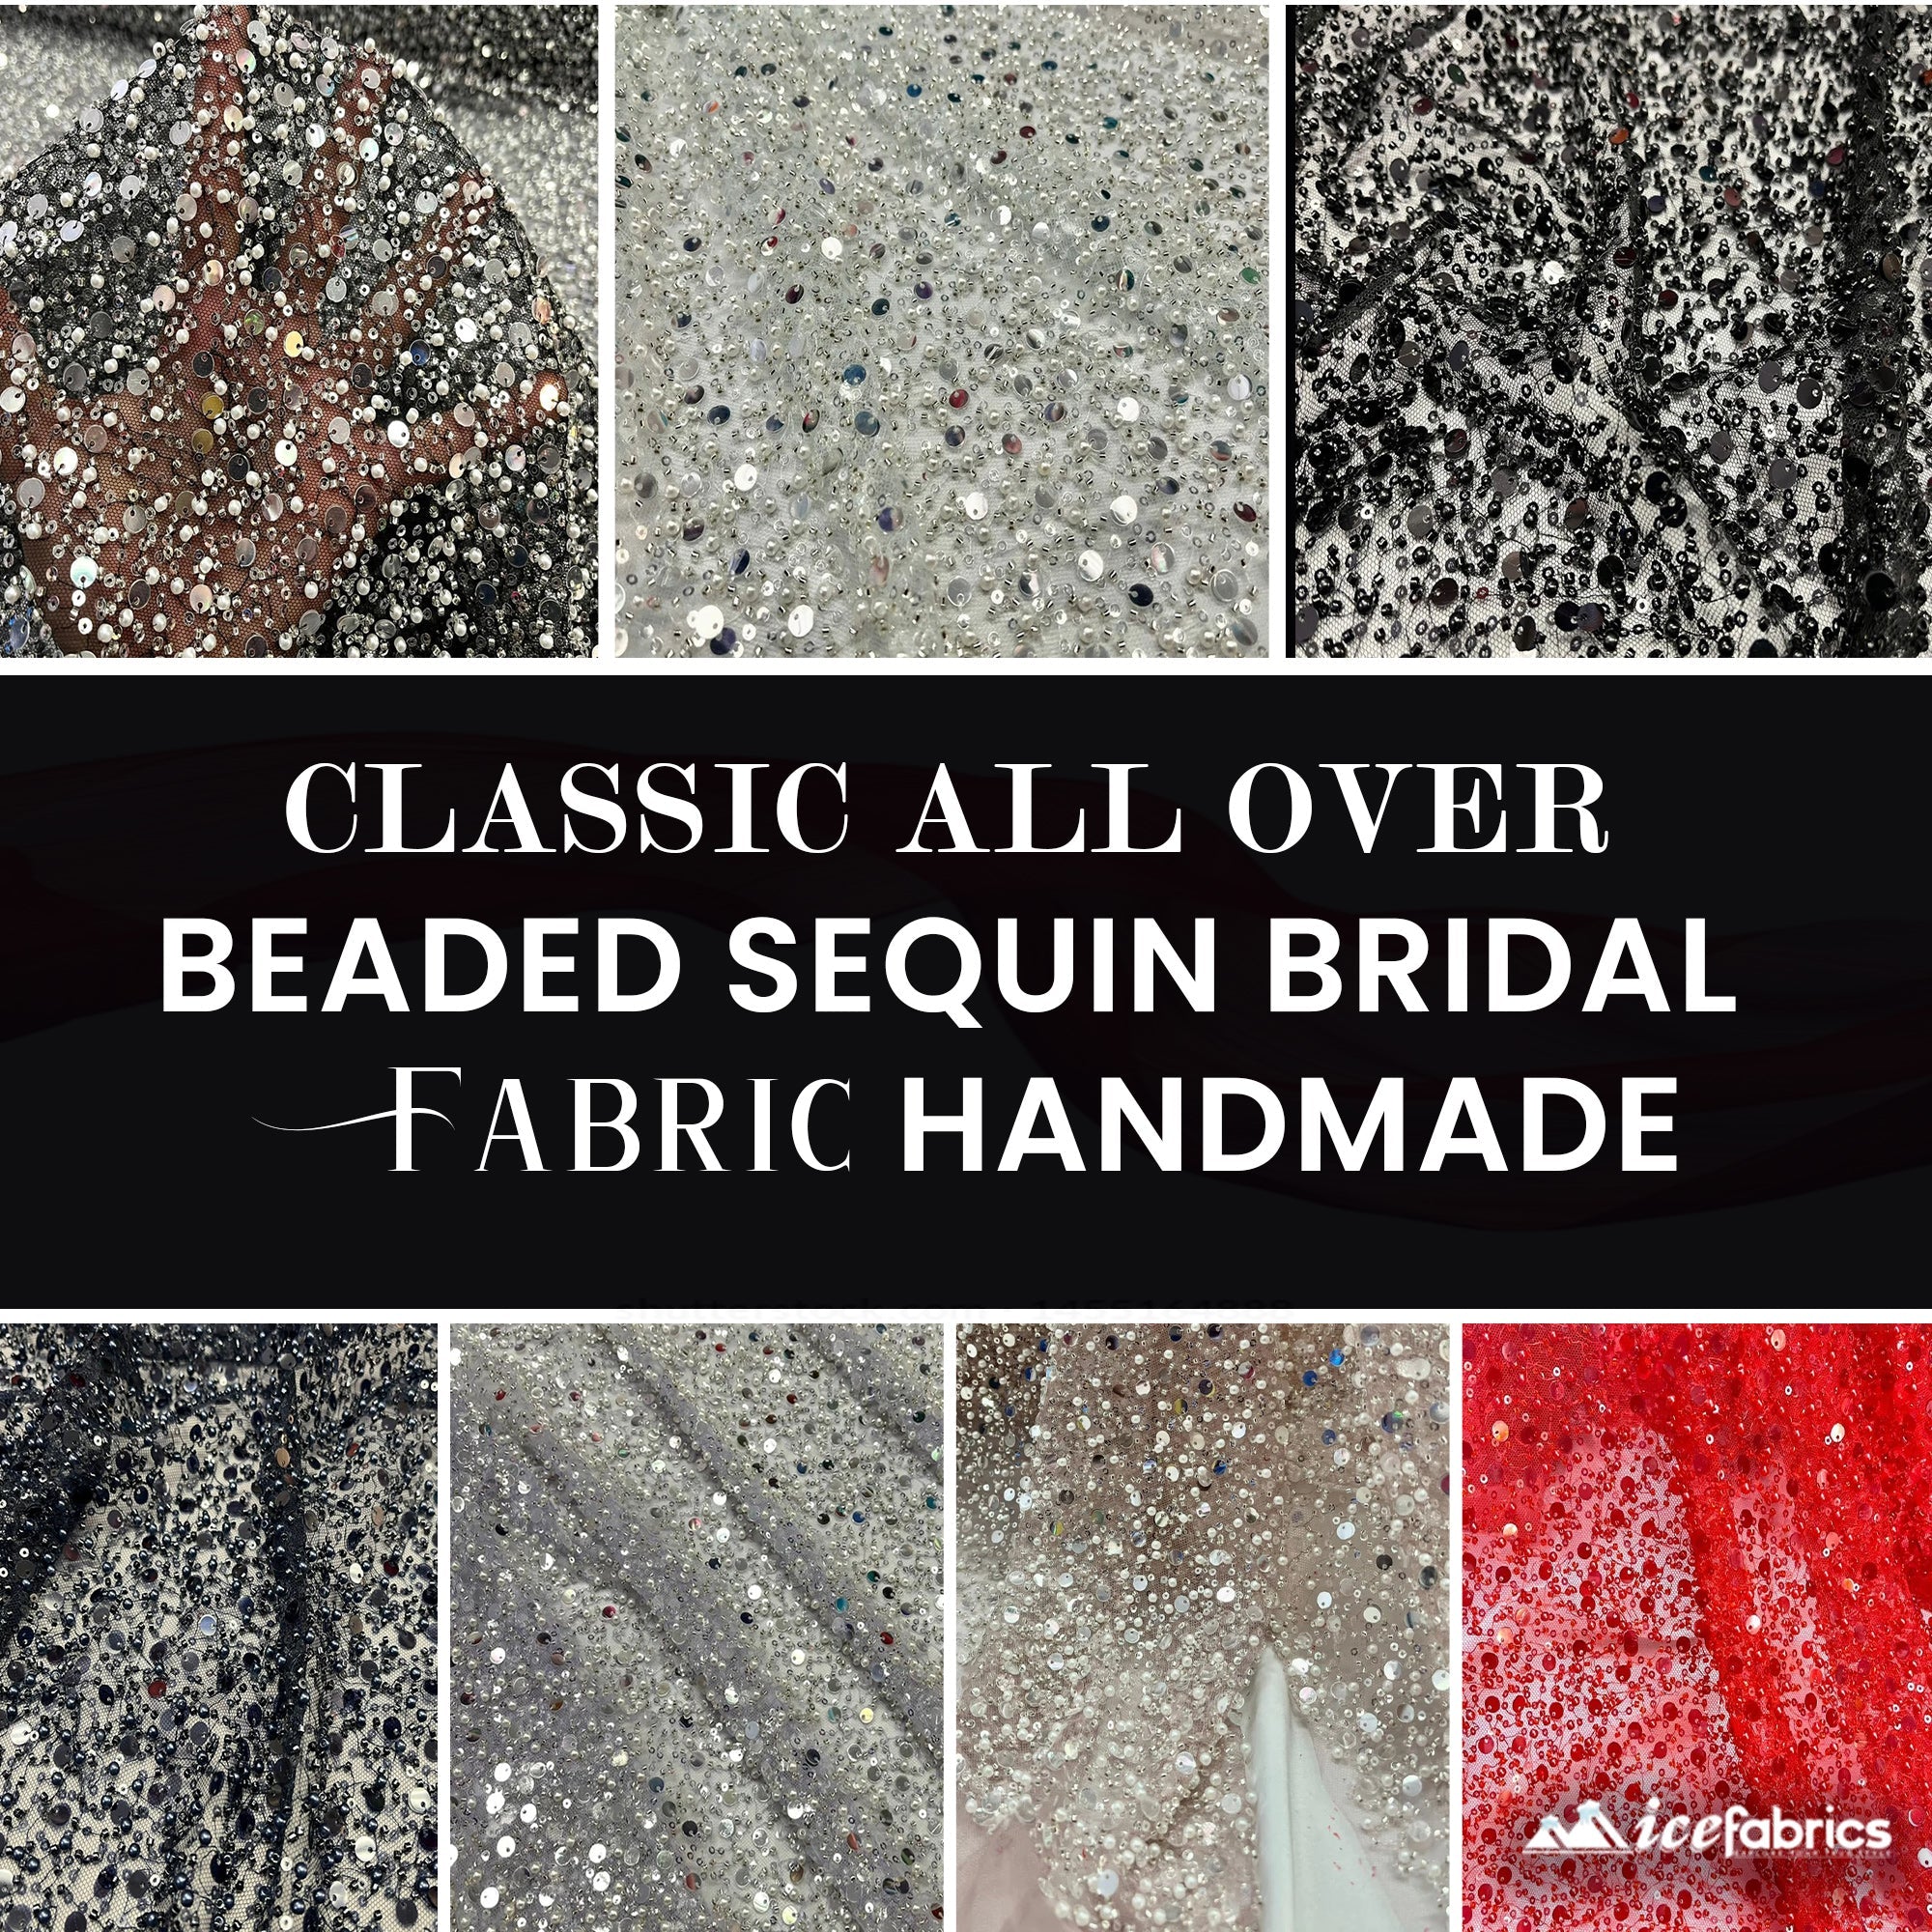 Classic All Over Beaded Sequin Bridal Fabric / HandmadeICE FABRICSICE FABRICSBy The Yard (58" Wide)Black Sequin on BlackClassic All Over Beaded Sequin Bridal Fabric / Handmade ICE FABRICS